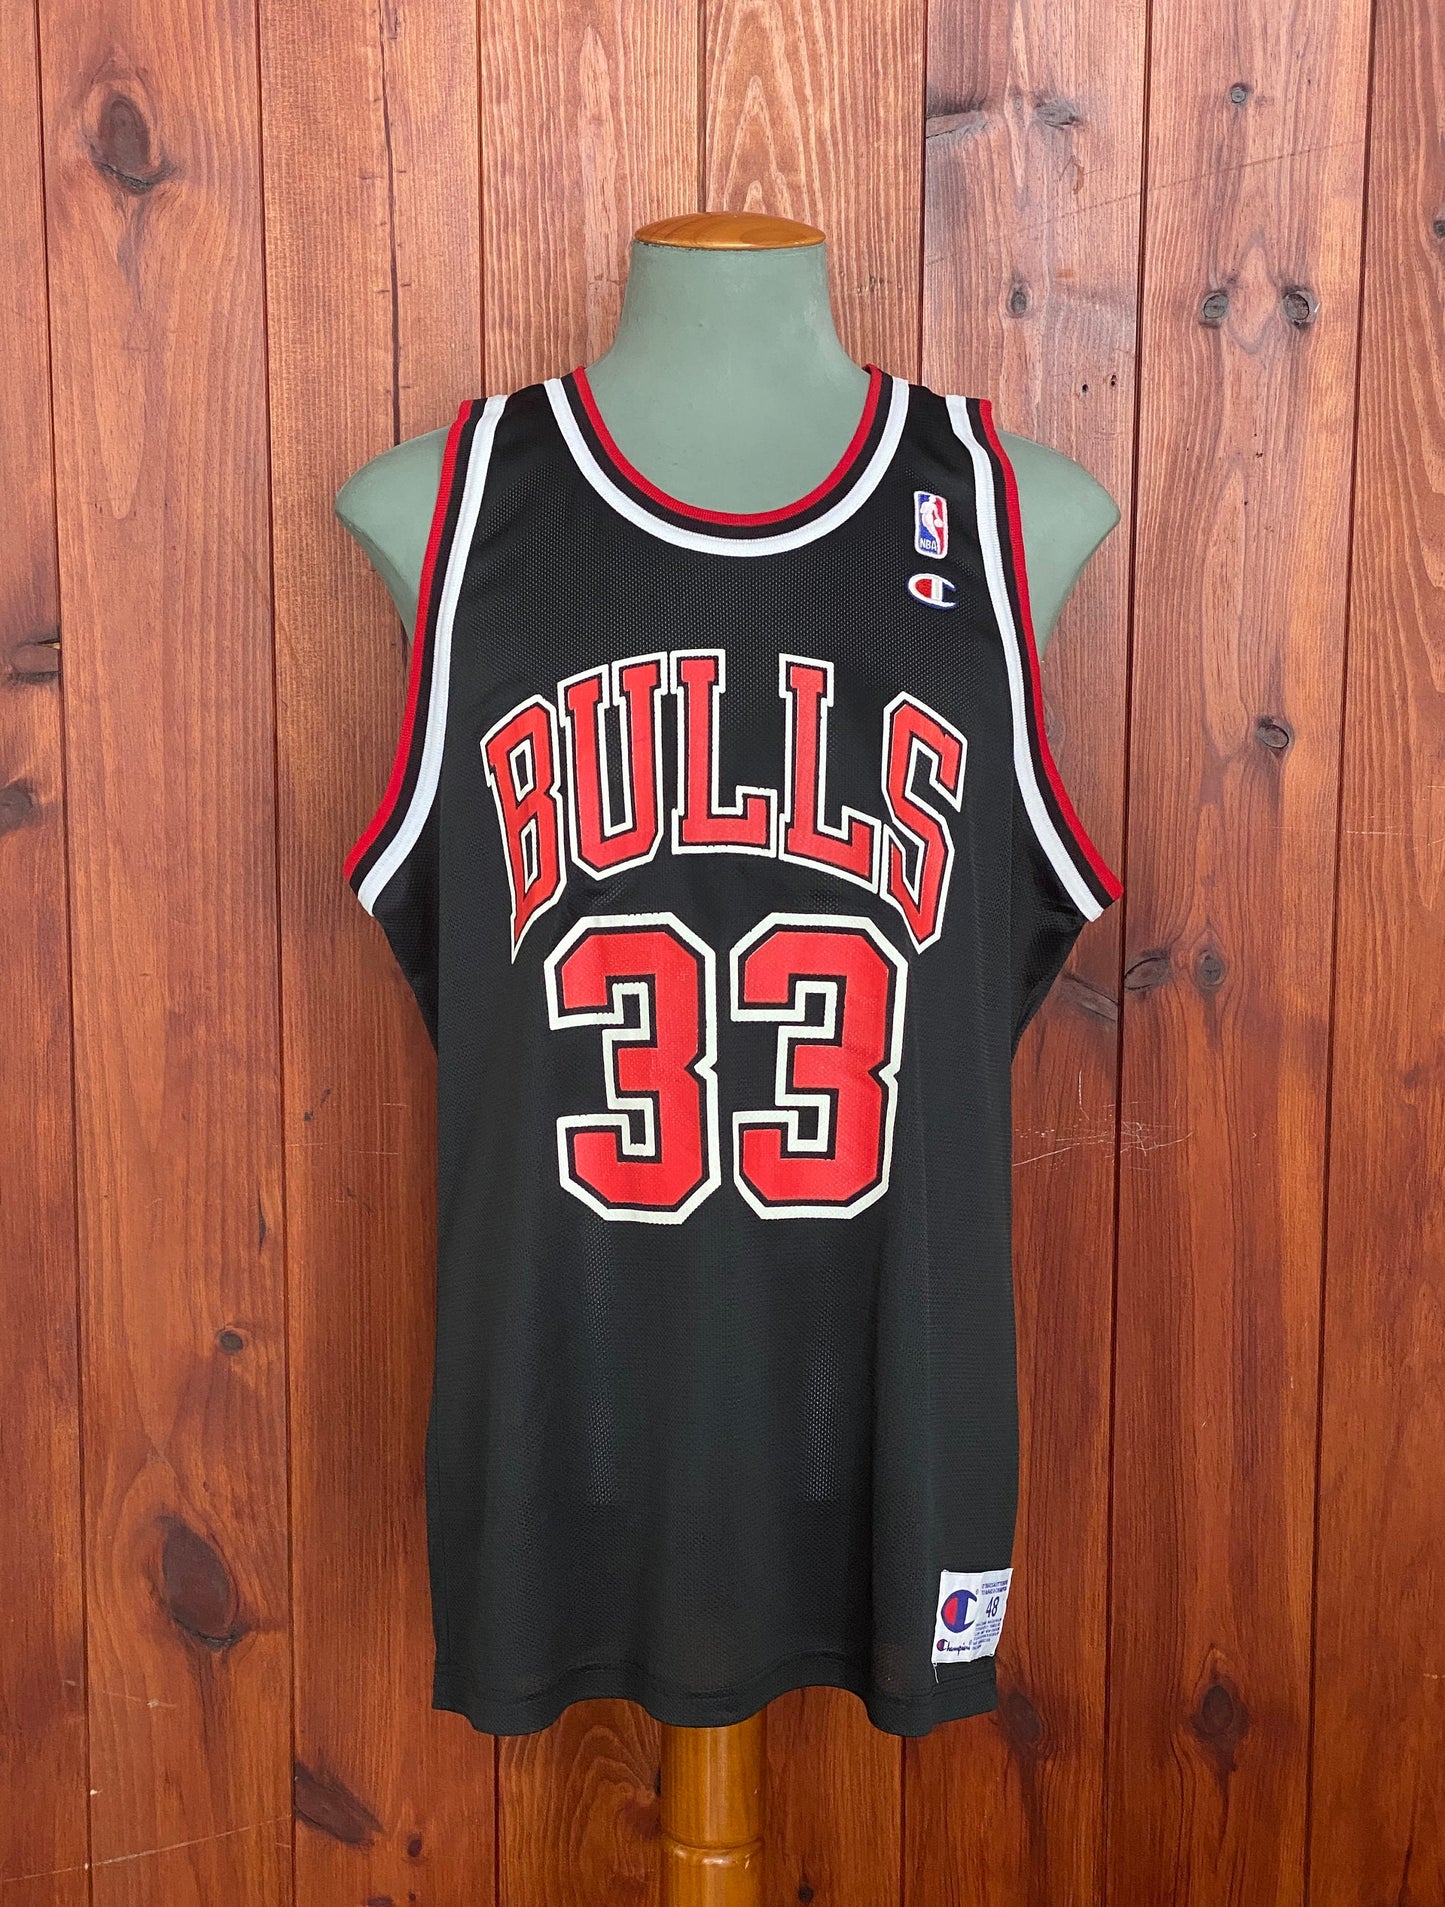 Size 48 Vintage 90s Chicago Bulls NBA Champion jersey, Pippen #33